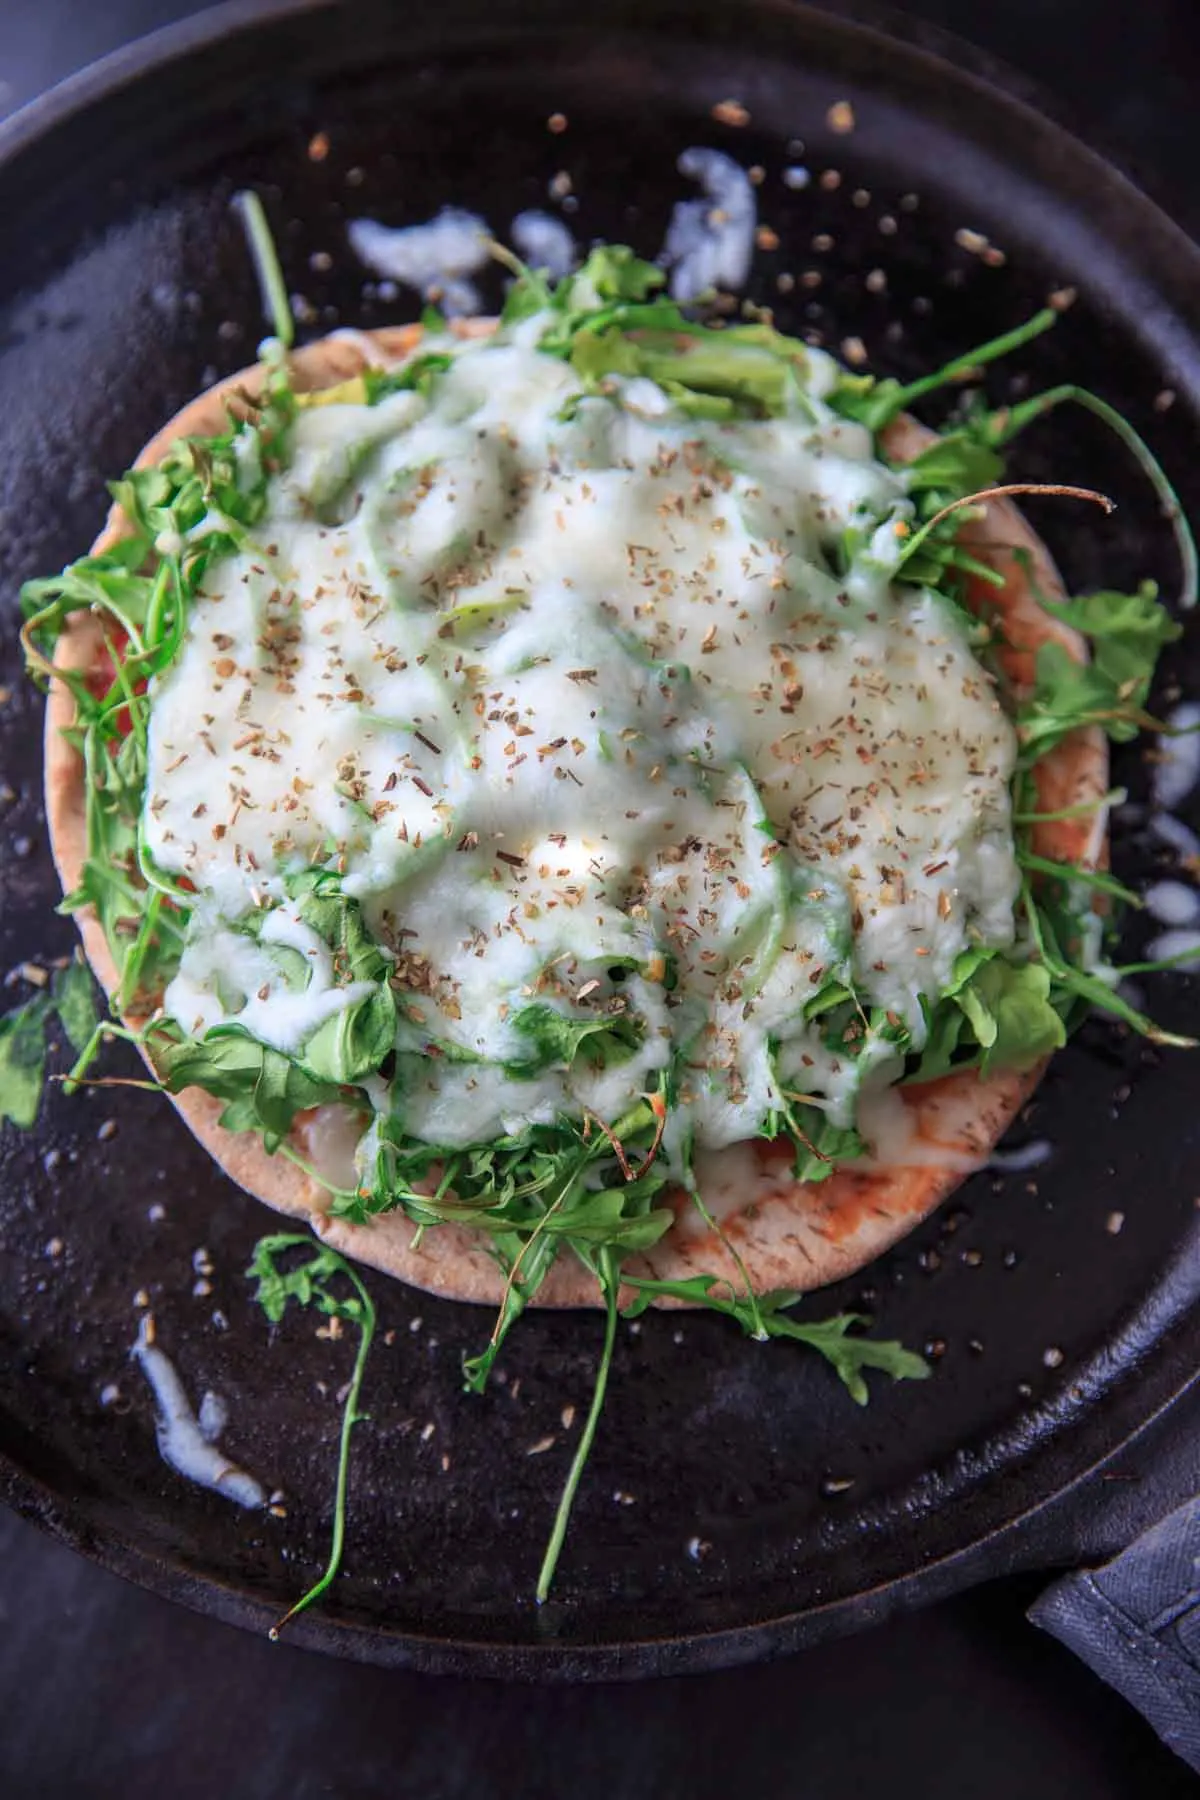 Quick and easy pita pizza recipe that you can make in the oven, microwave, or even on the grill! Fast lunch or dinner option that is completely customizable and faster than delivery.